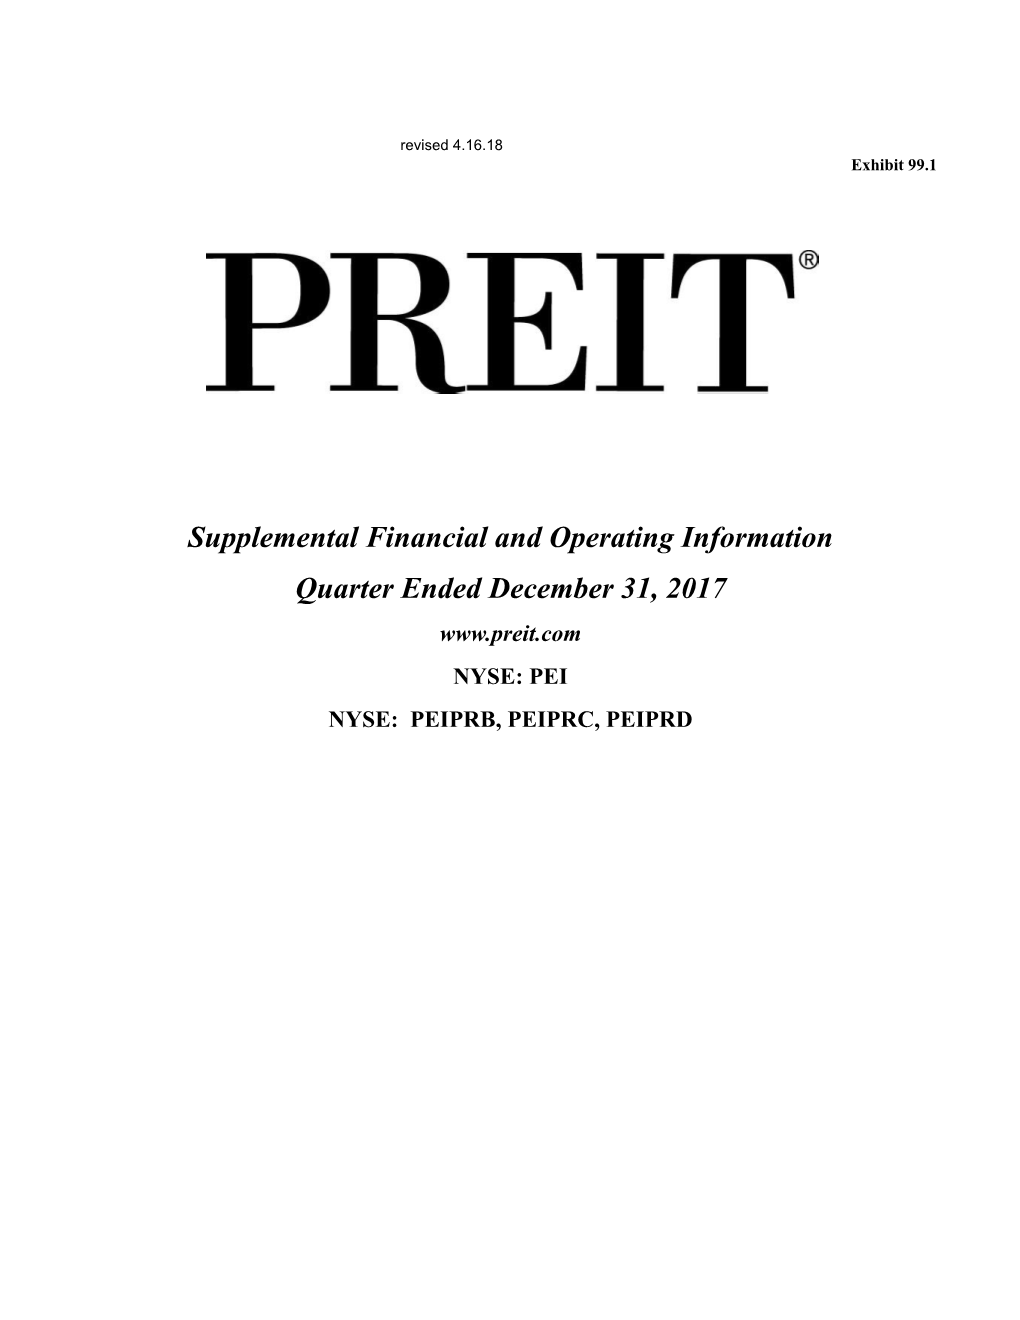 Supplemental Financial and Operating Information Quarter